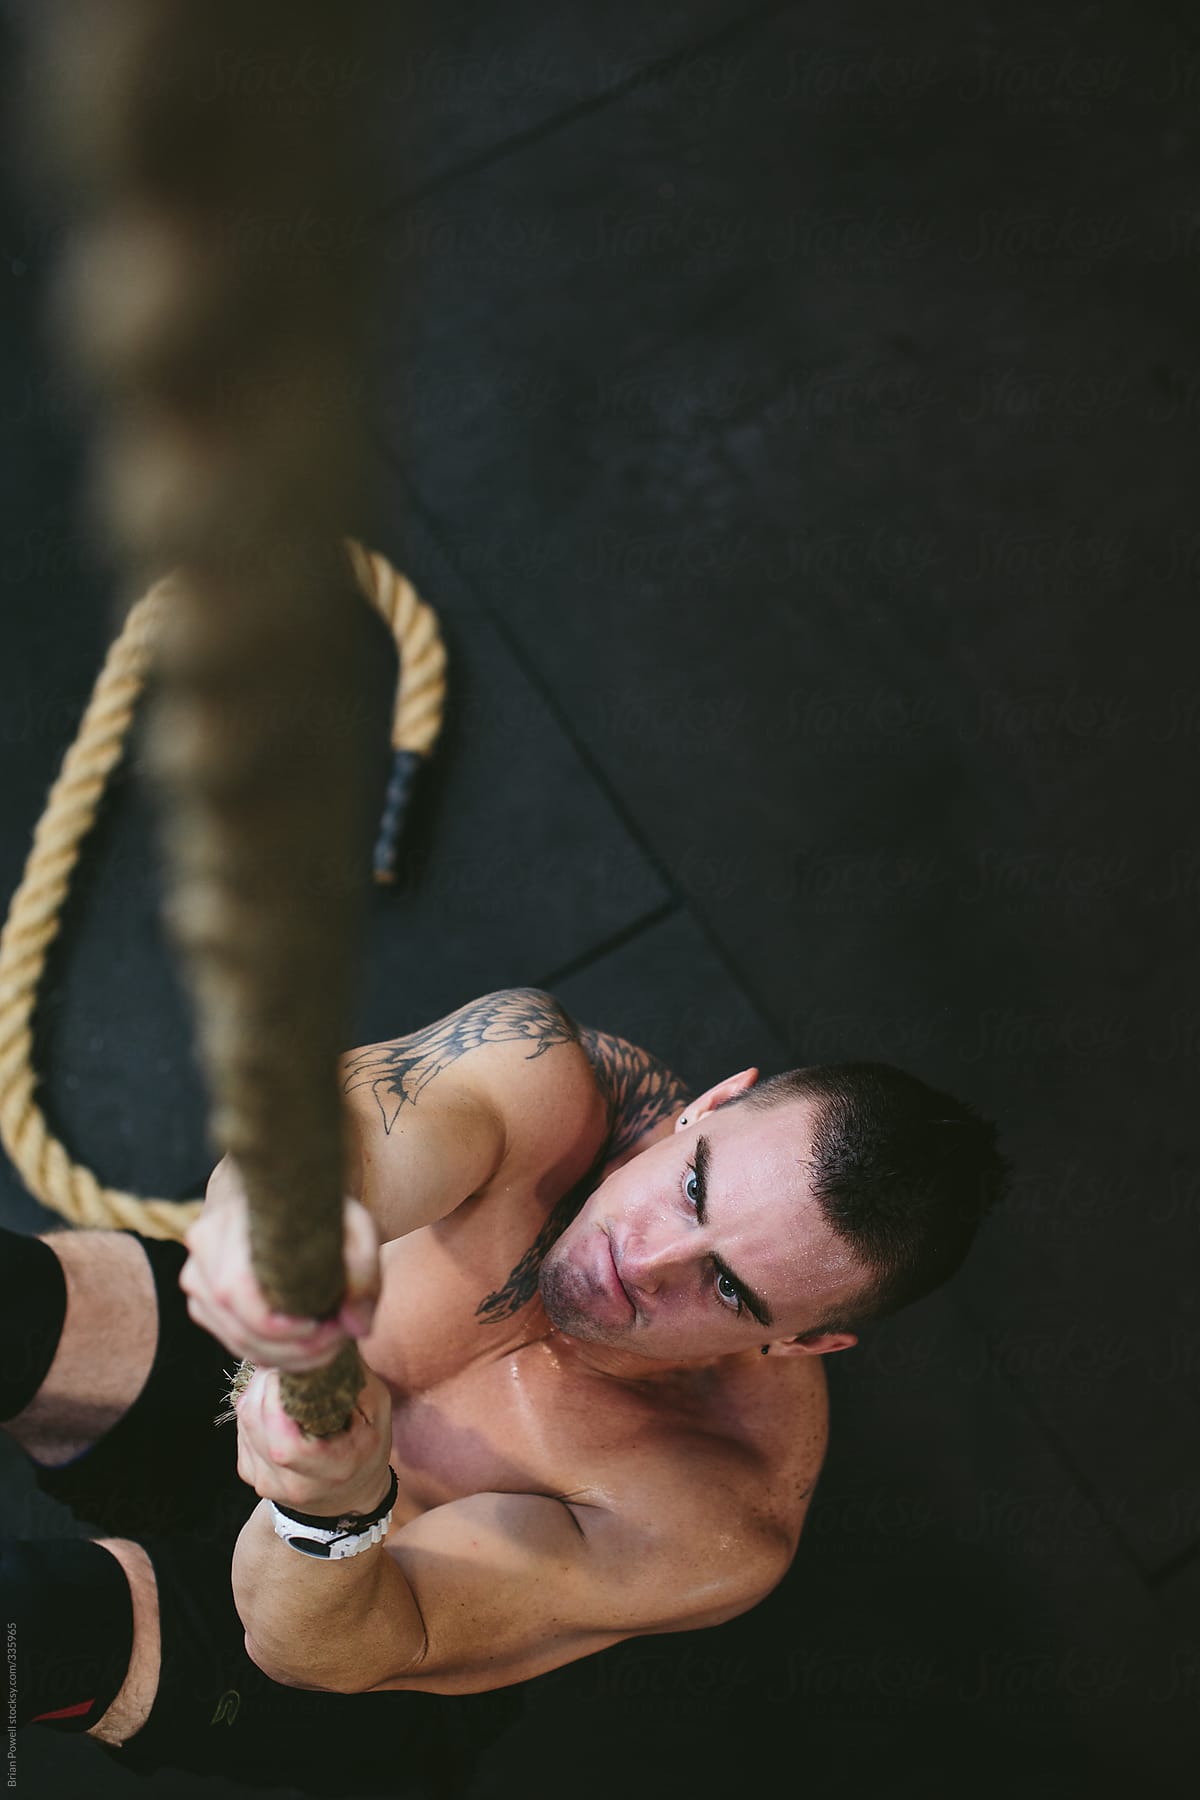 Man Doing L Sit Rope Climb In Gym By Stocksy Contributor Brian